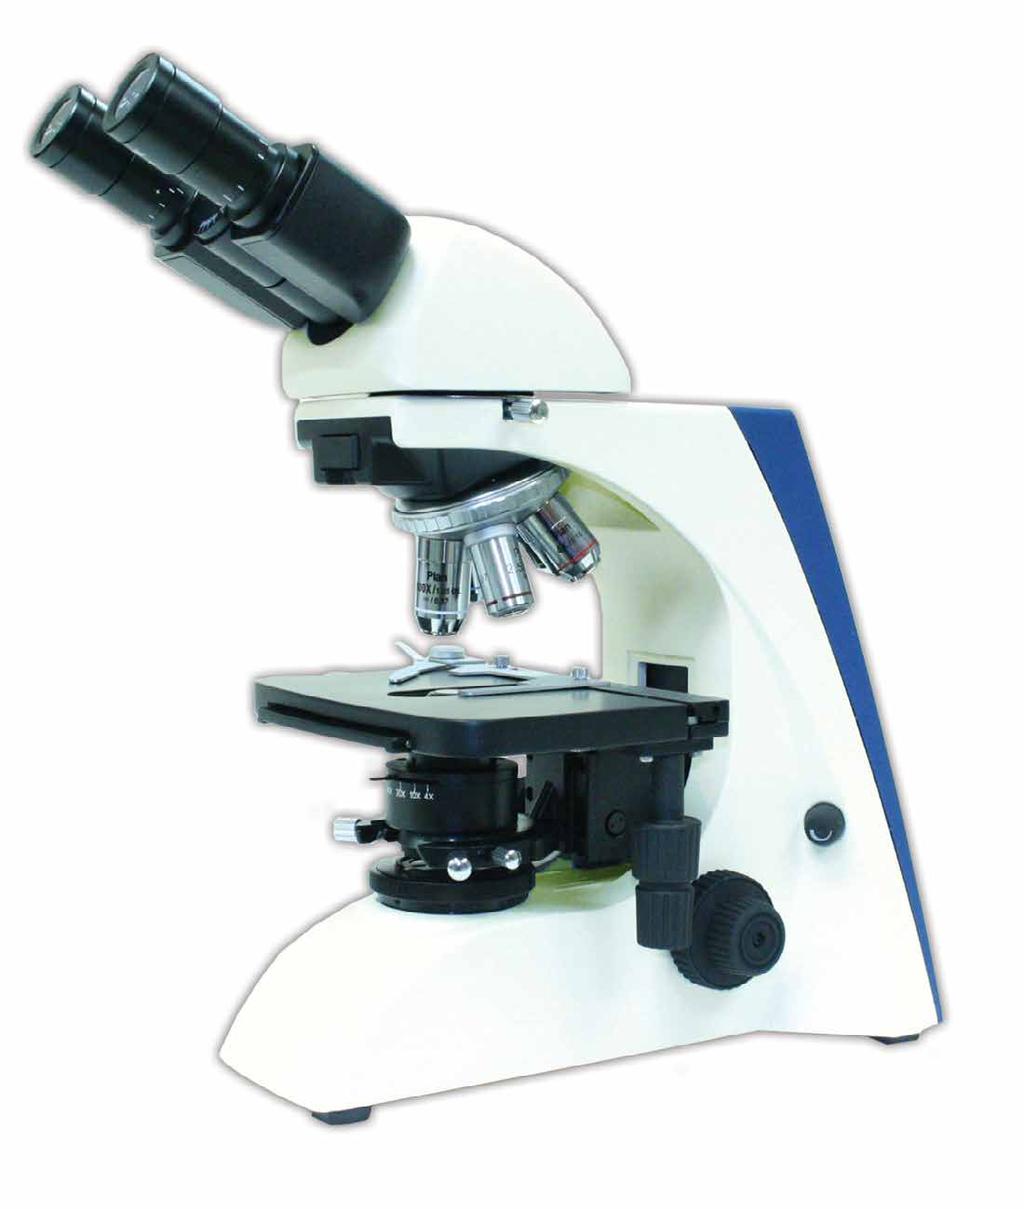 Microlux IV - LED COMPOUND MICROSCOPE USER S MANUAL This document is property of Seiler Instrument & Mfg. Co., Inc.